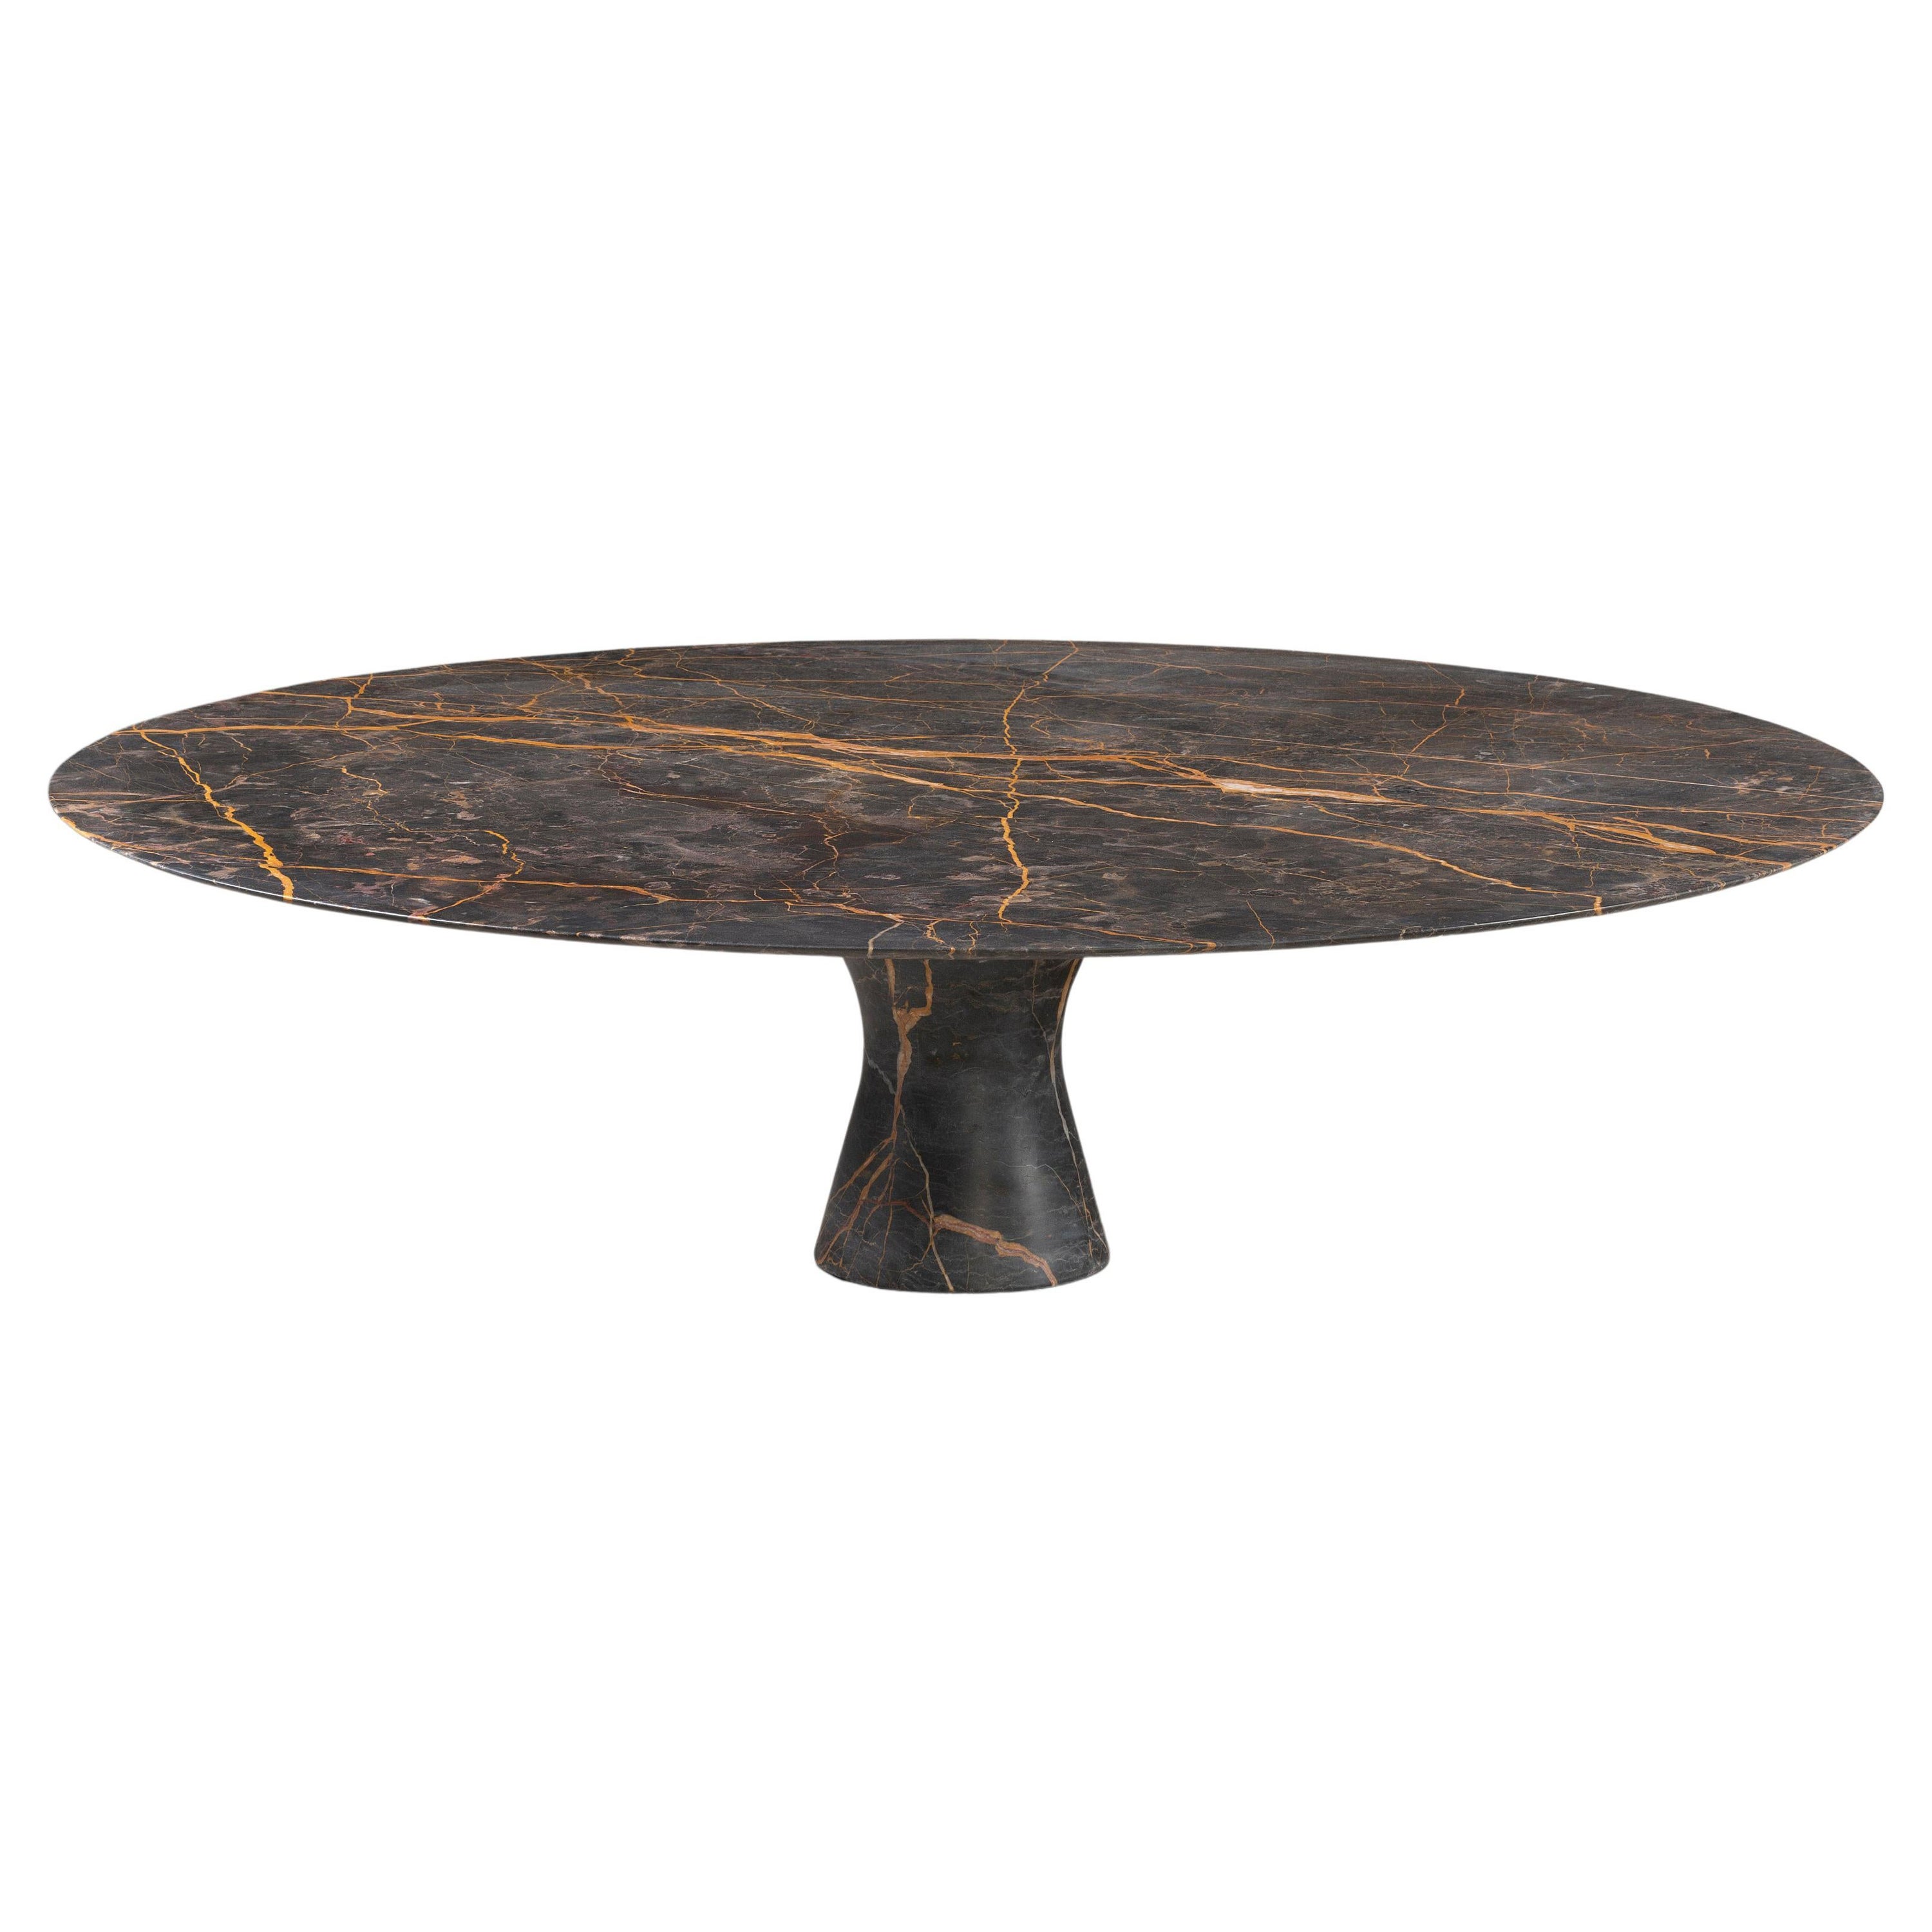 Port Saint Laurent Refined Contemporary Marble Oval Low Table 130/27